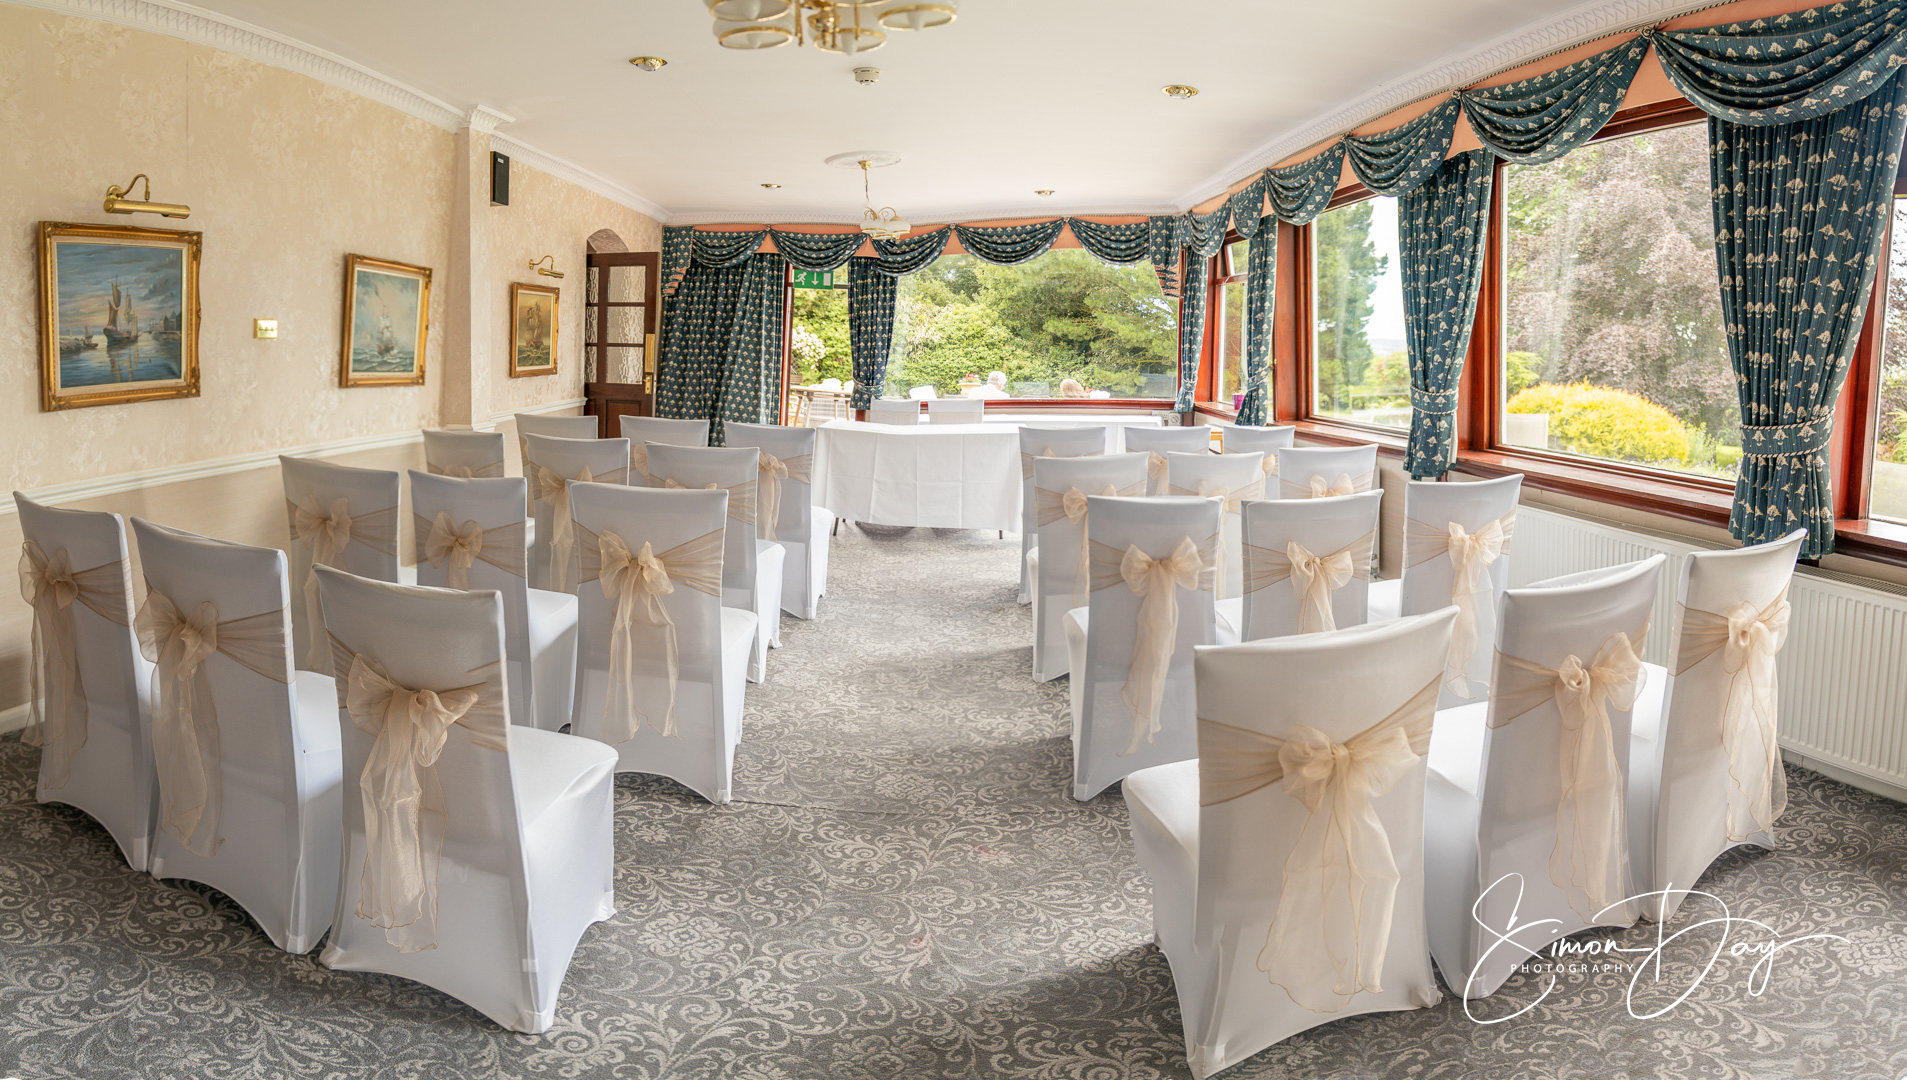 The wedding reception room at the Gipsy Hill Hotel, Exeter, Devon.